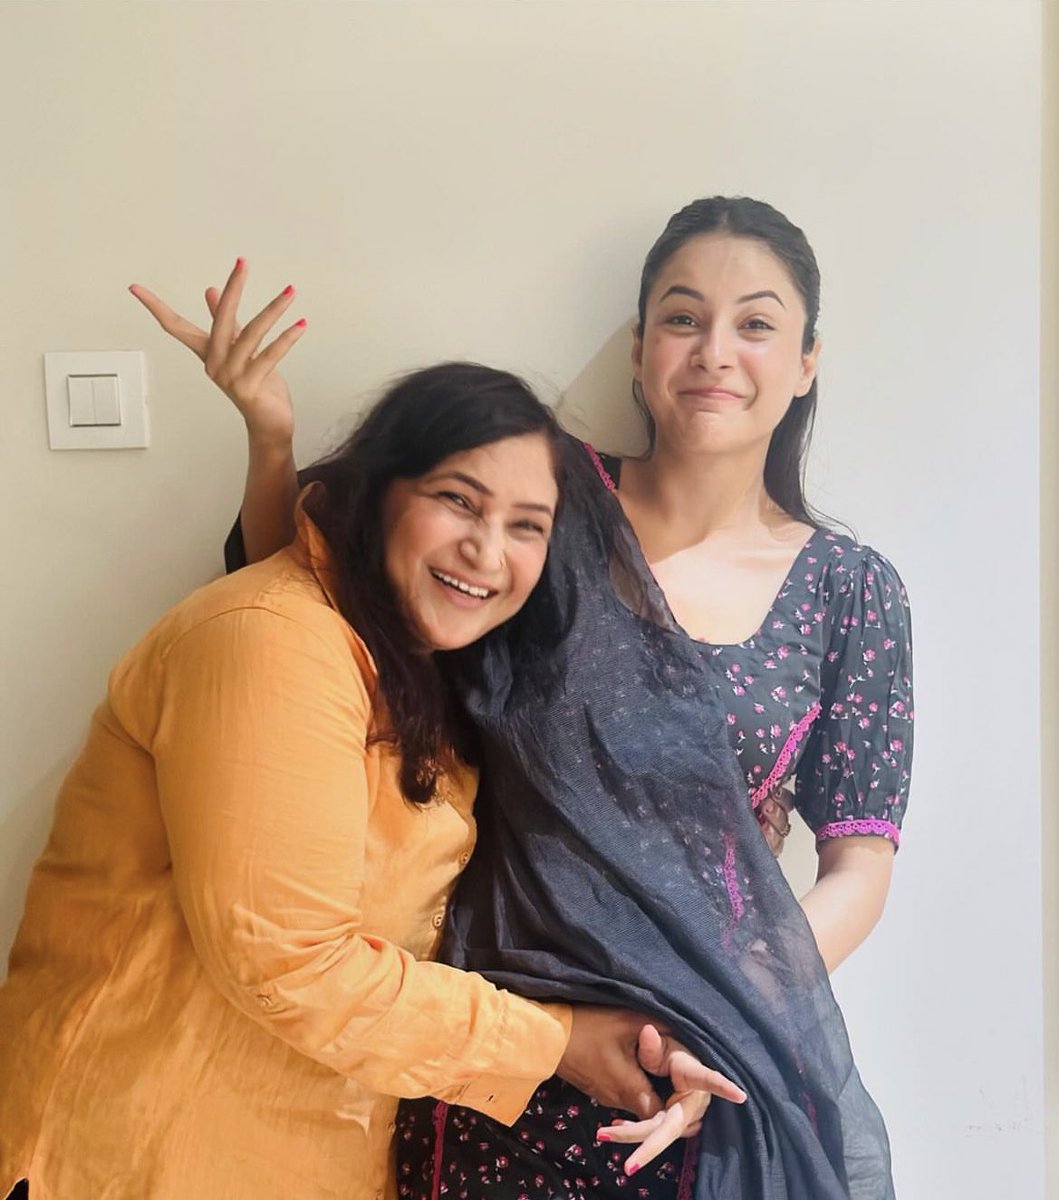 #ShehnaazGill shares wholesome pictures with her mother on the occasion of #MothersDay ❤️✨

#ShehnaazKaurGill #ShehnaazGallery #Shehnaazians #SHEHNAAZGILL @Shehnaaz_Love10 @ShehnaazShineFC @ShehnaazGillTM @ShehnaazPure @shehnaazfcCA